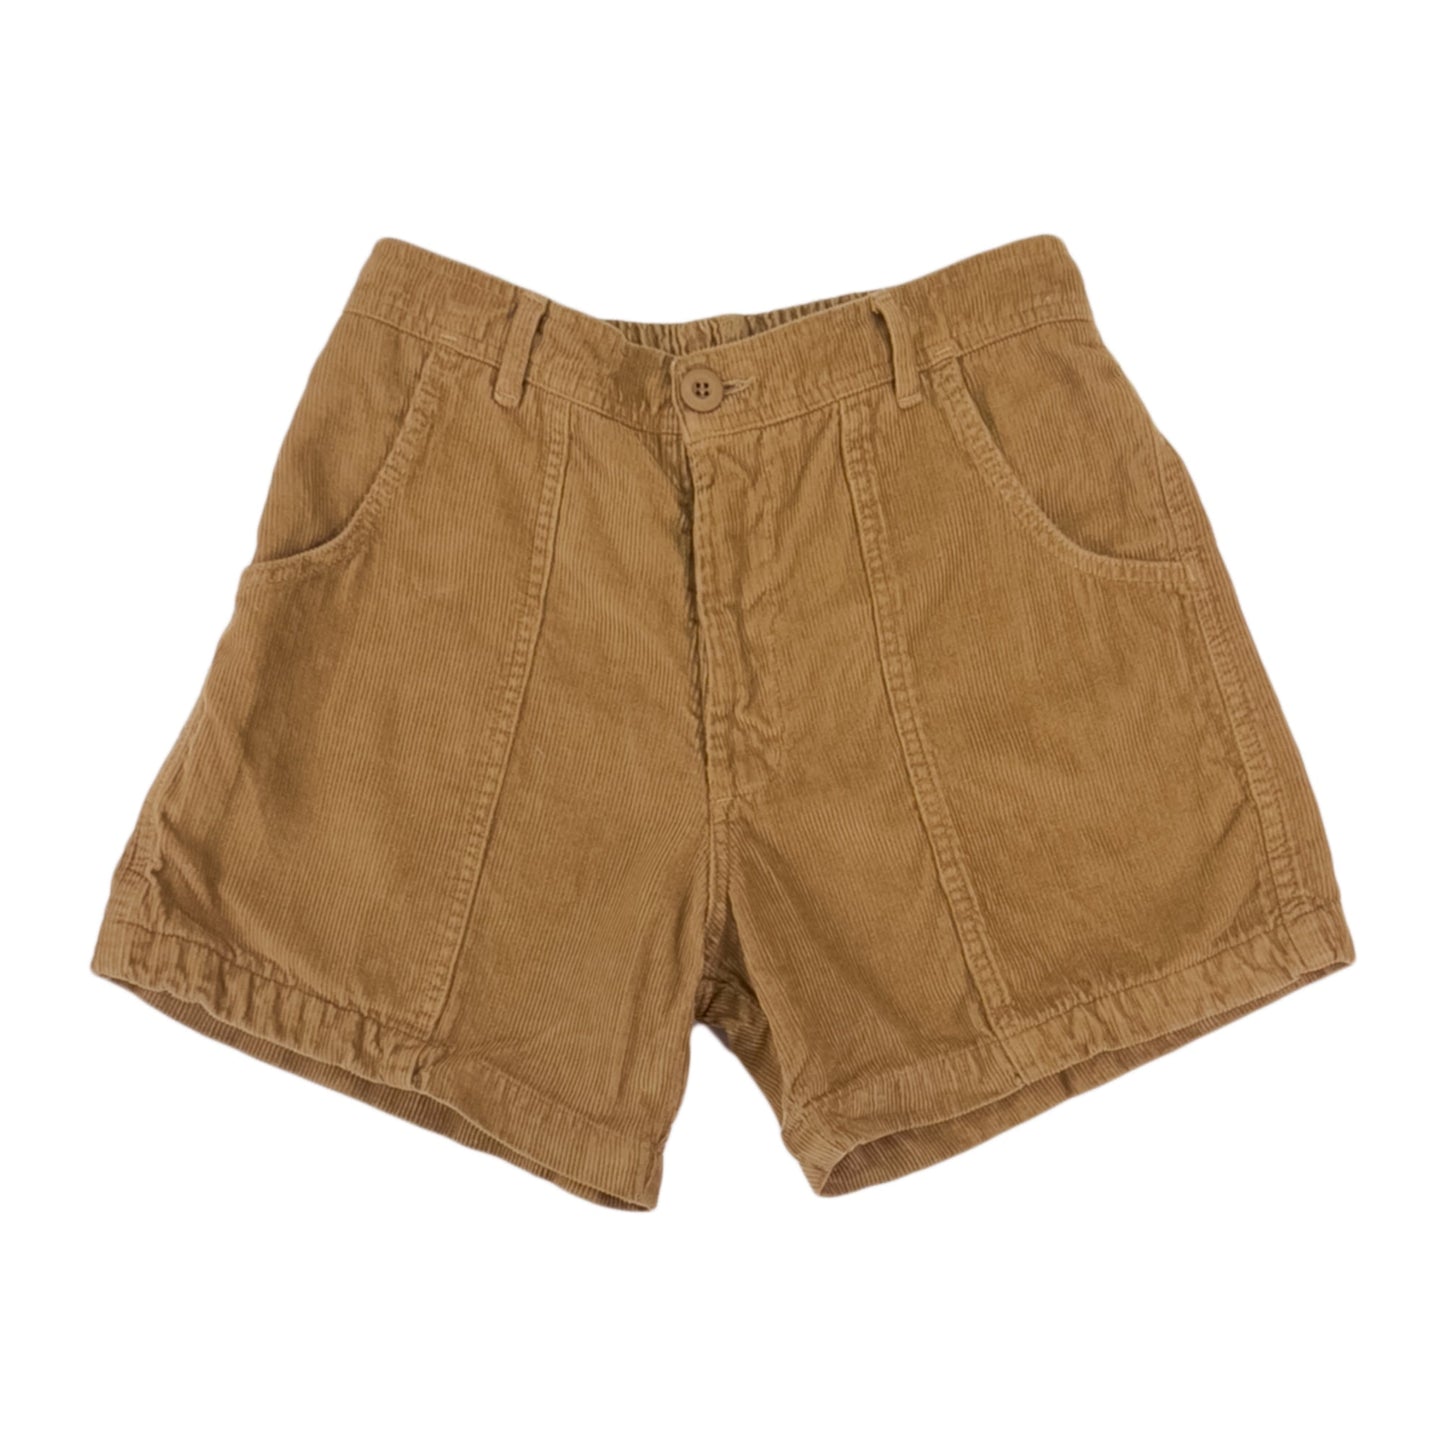 Inspired by the shorts we wore all year long in early 80s Southern California and built from a soft 11-wale hemp and organic cotton corduroy. Made with a hemp and organic cotton blend in sunny California.